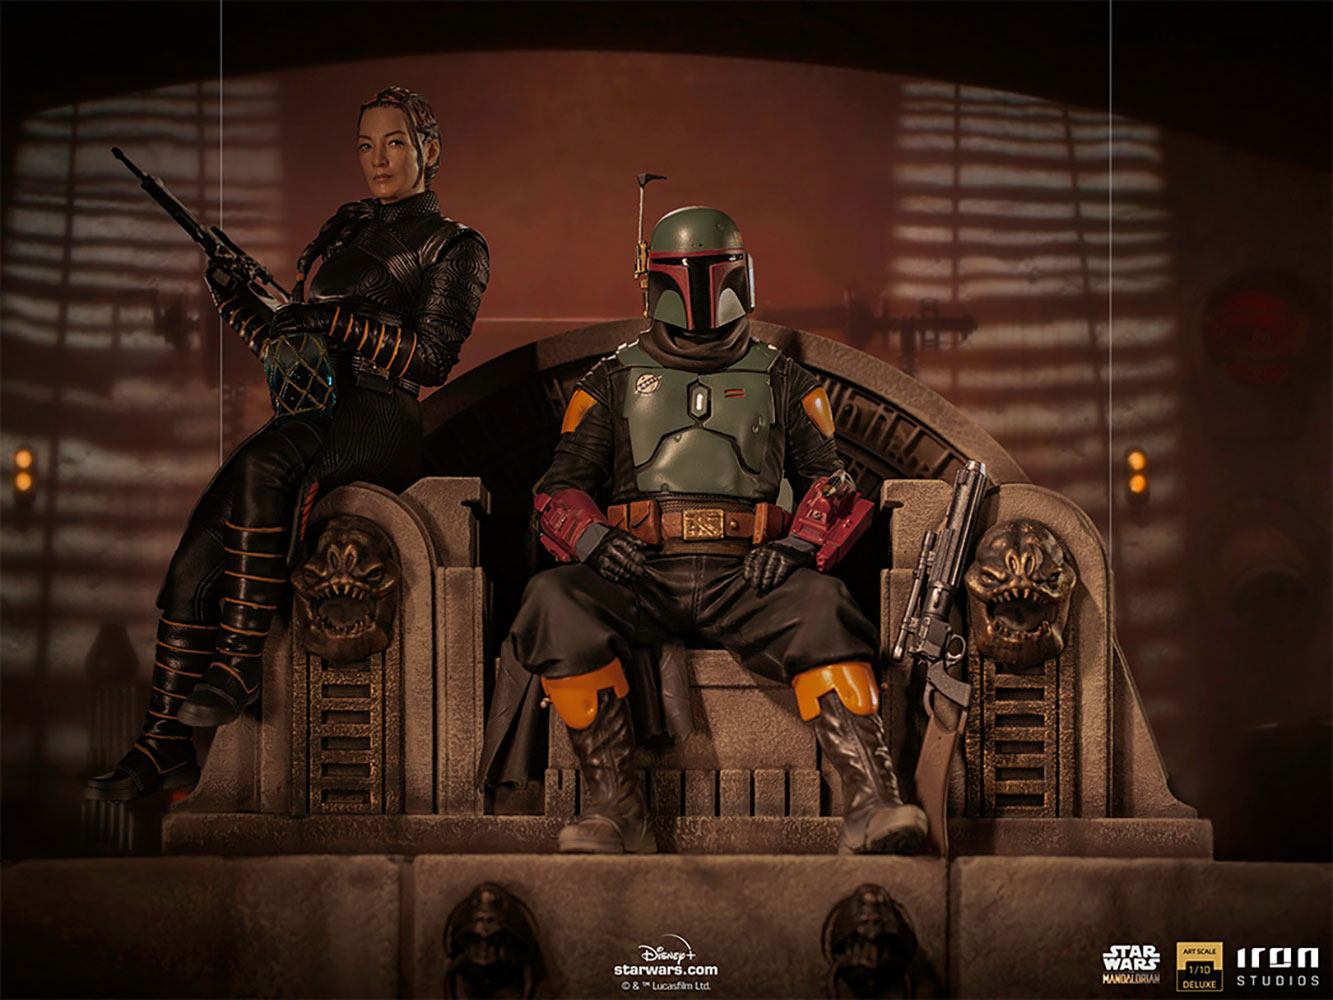 TBOBF Boba Fett & Fennec Shand on Throne Deluxe 1:10 Scale Statue 5